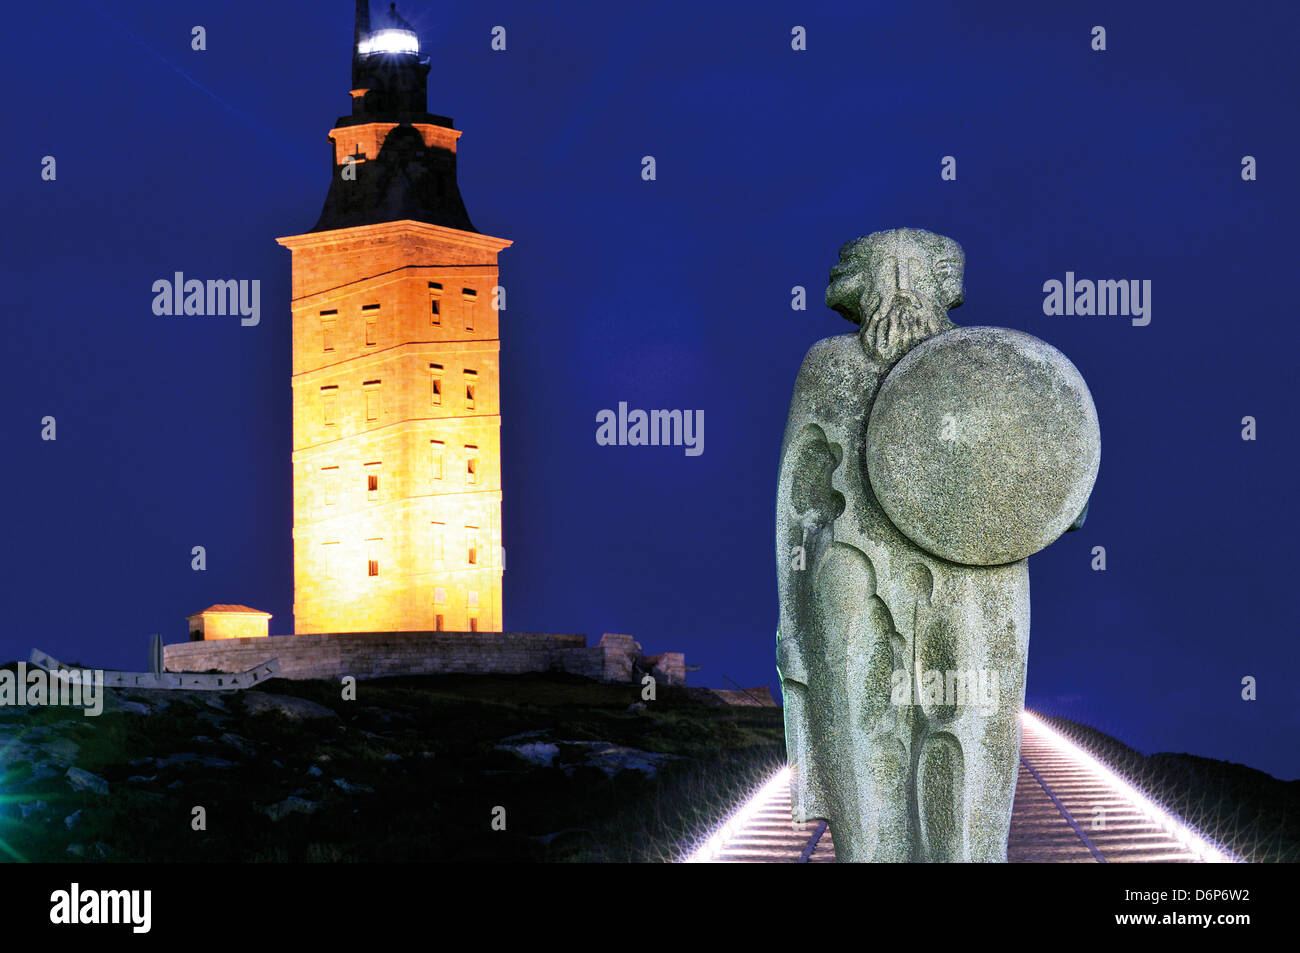 Spain, Galicia: Hercules tower and sculpture of Celtic warrior Bréogan in A Coruna at night Stock Photo